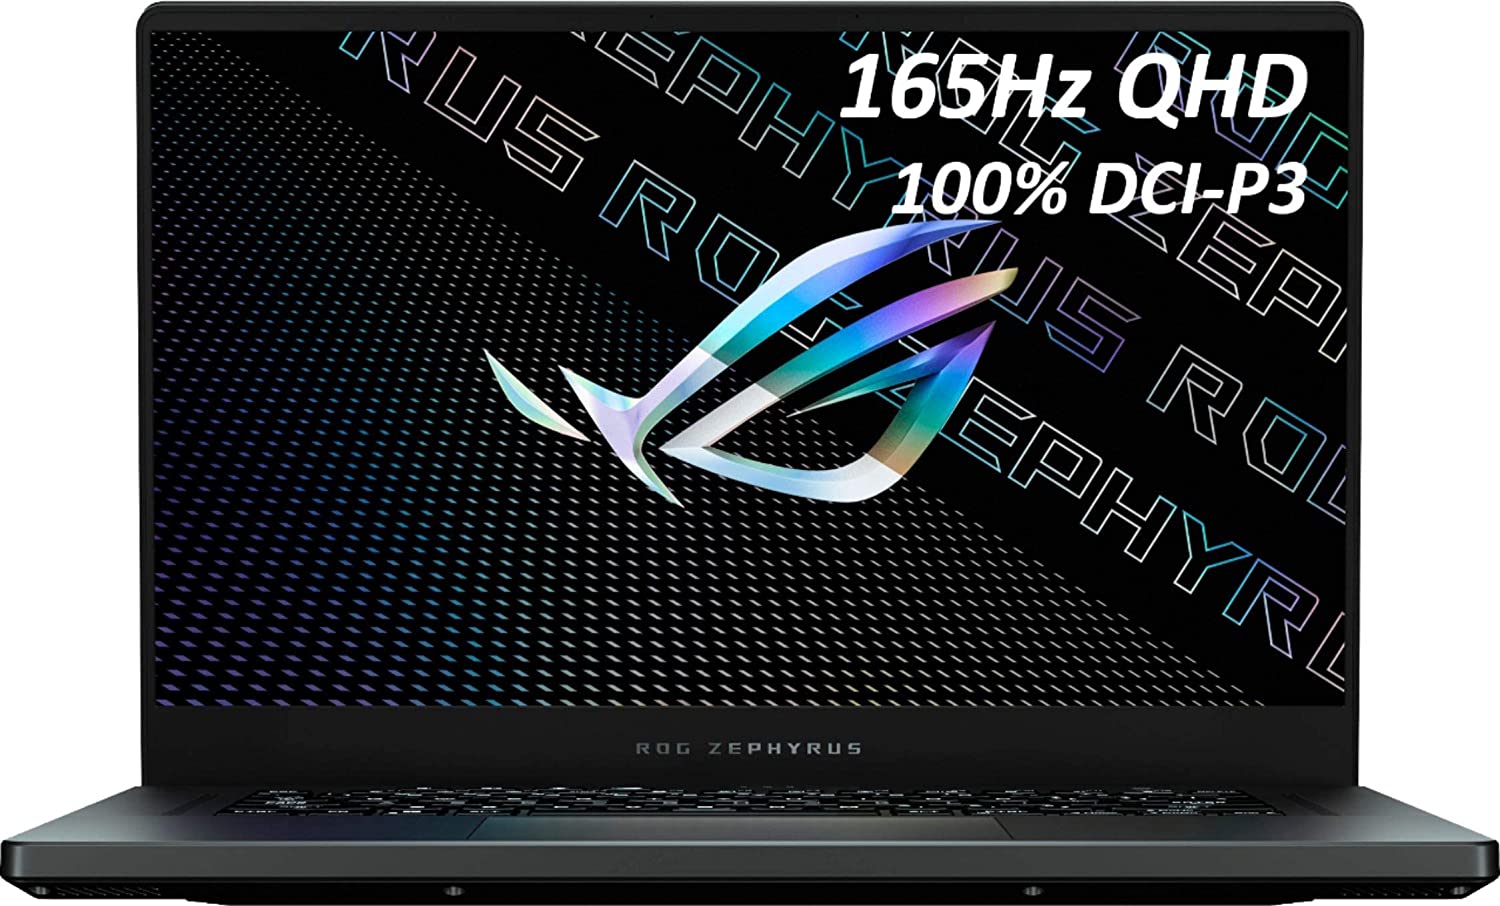 The ASUS ROG Zephyrus QHD Gaming Laptop with Ryzen 9, RTX 3070, 16GB RAM, and 1TB SSD - Smart Tech Shopping